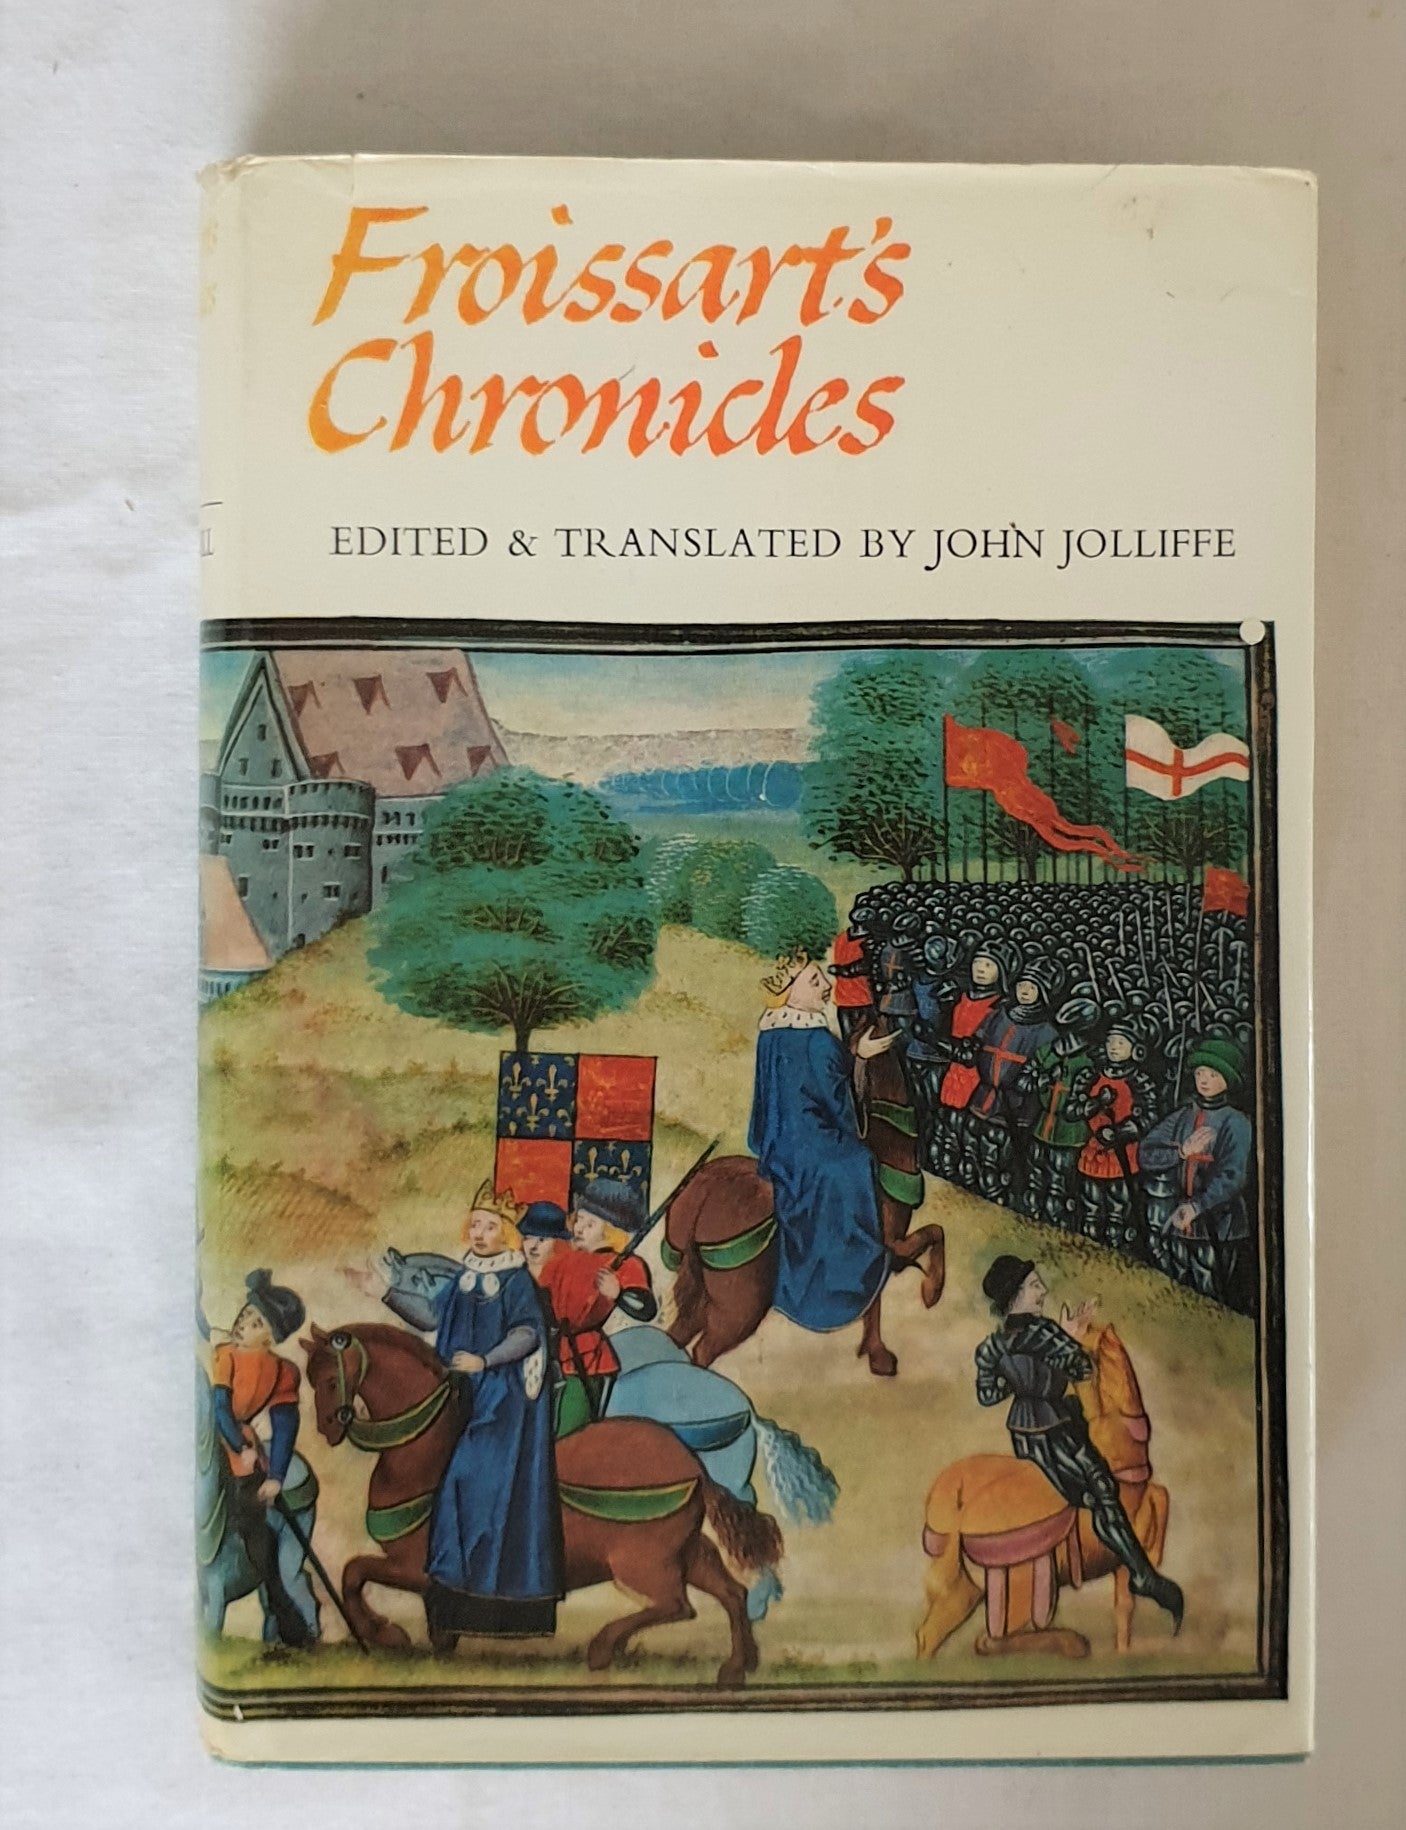 Froissart's Chronicles  Edited and Translated by John Jolliffe